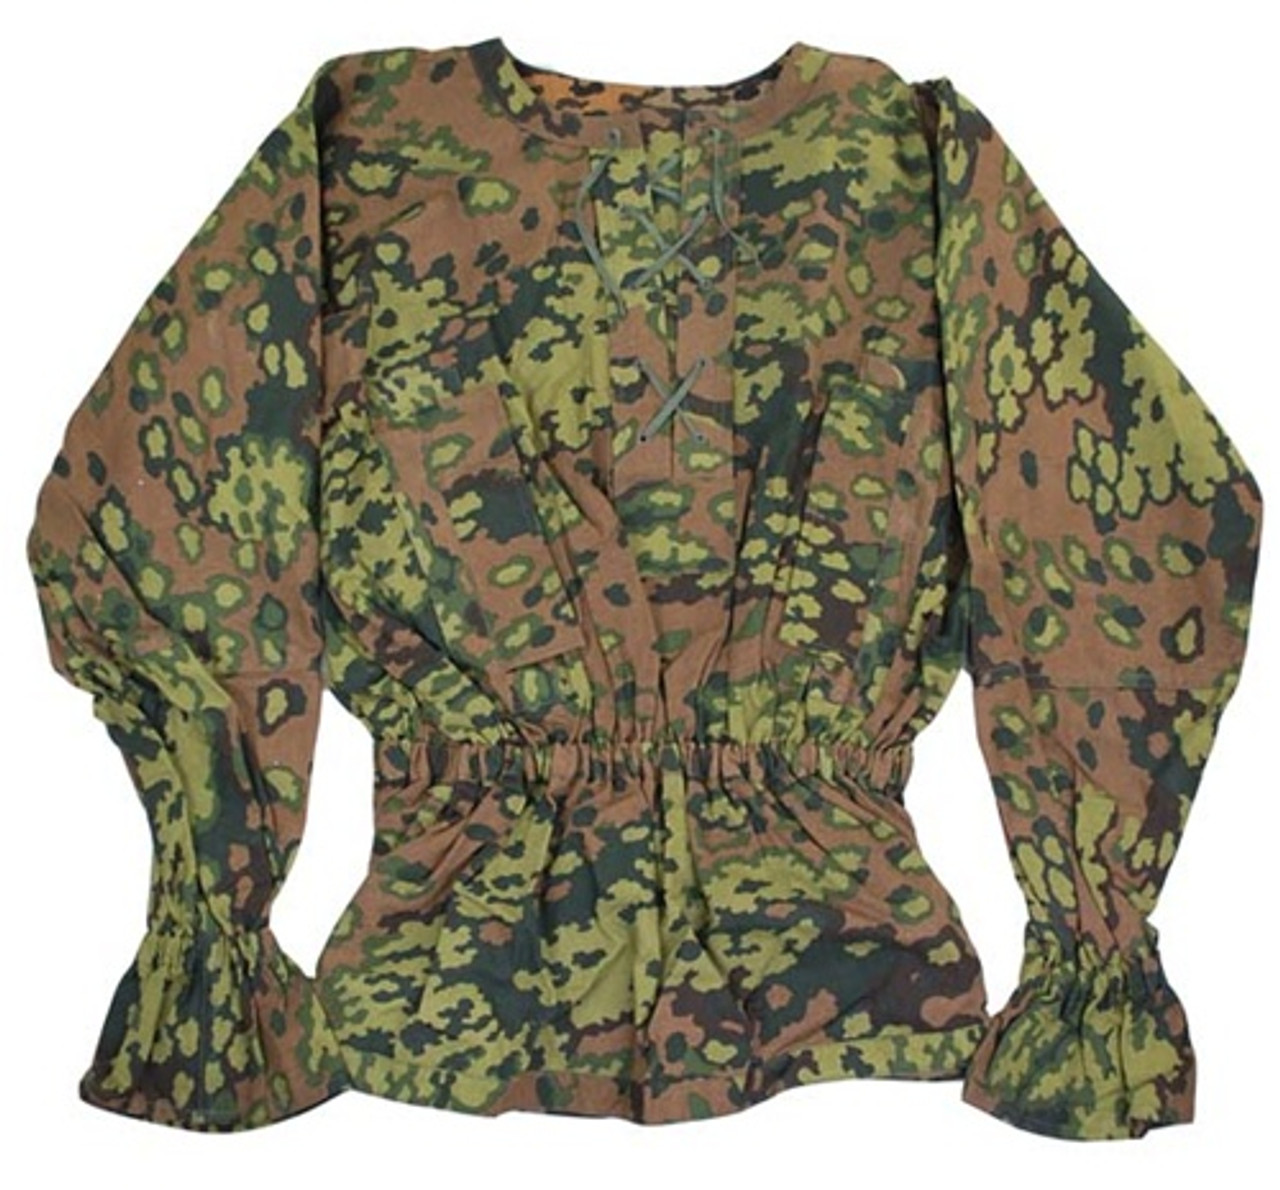 SS M40 Type I Camouflage Smock from Hessen Antique